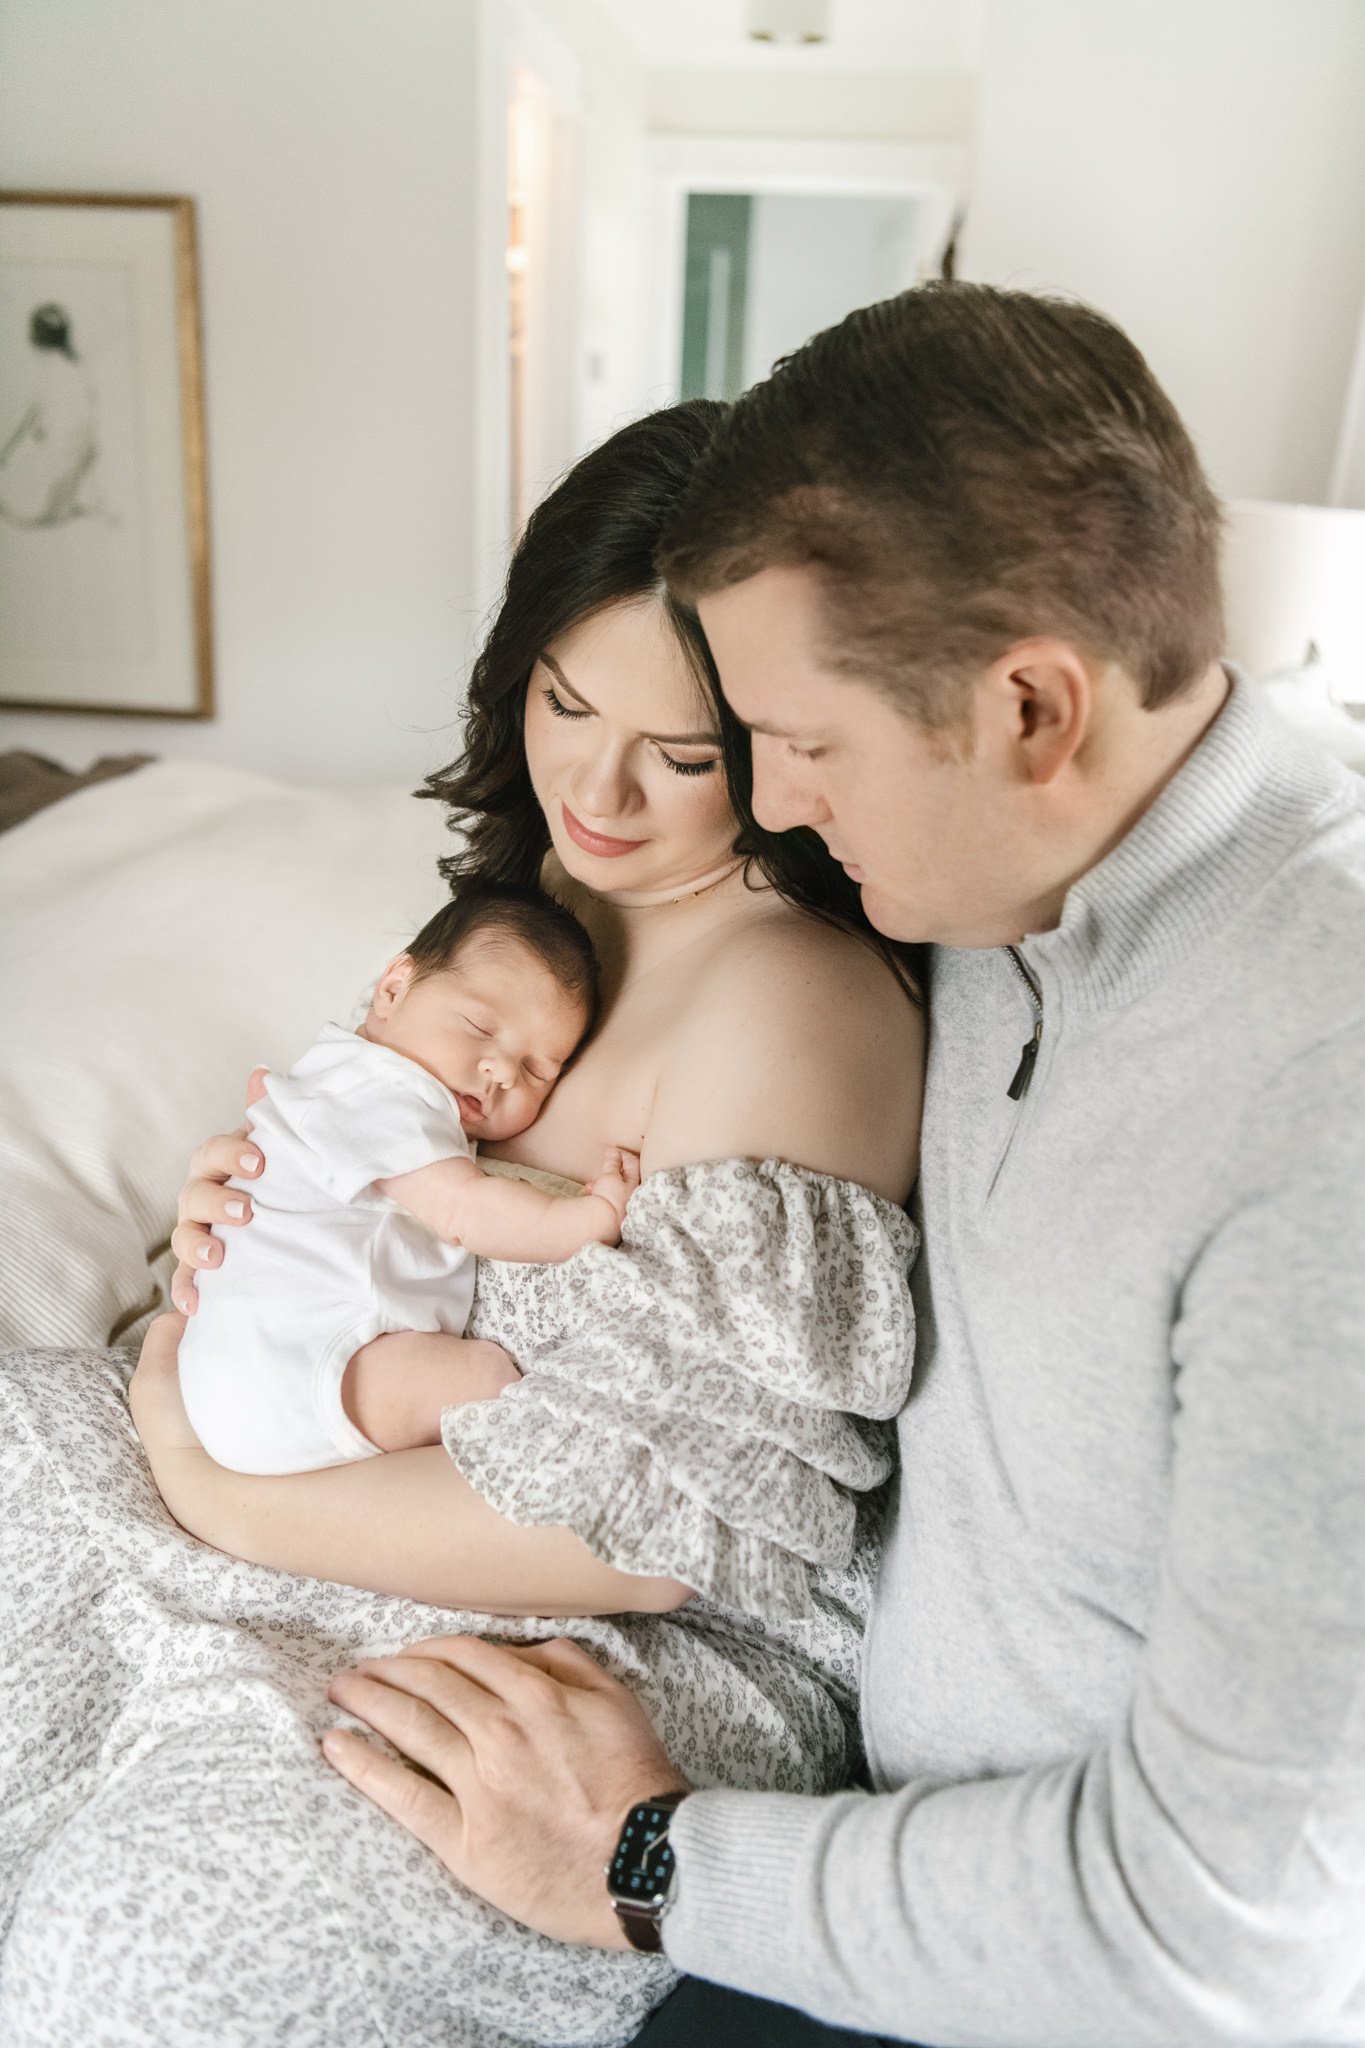  A mother and father look sweetly down at their newborn baby girl captured by Nicole Hawkins PHotography in the Montclair area. in-home newborns NJ/NY newborns #NicoleHawkinsPhotography #NicoleHawkinsNewborns #MontclairNewbornPhotographer #InHomeNewb